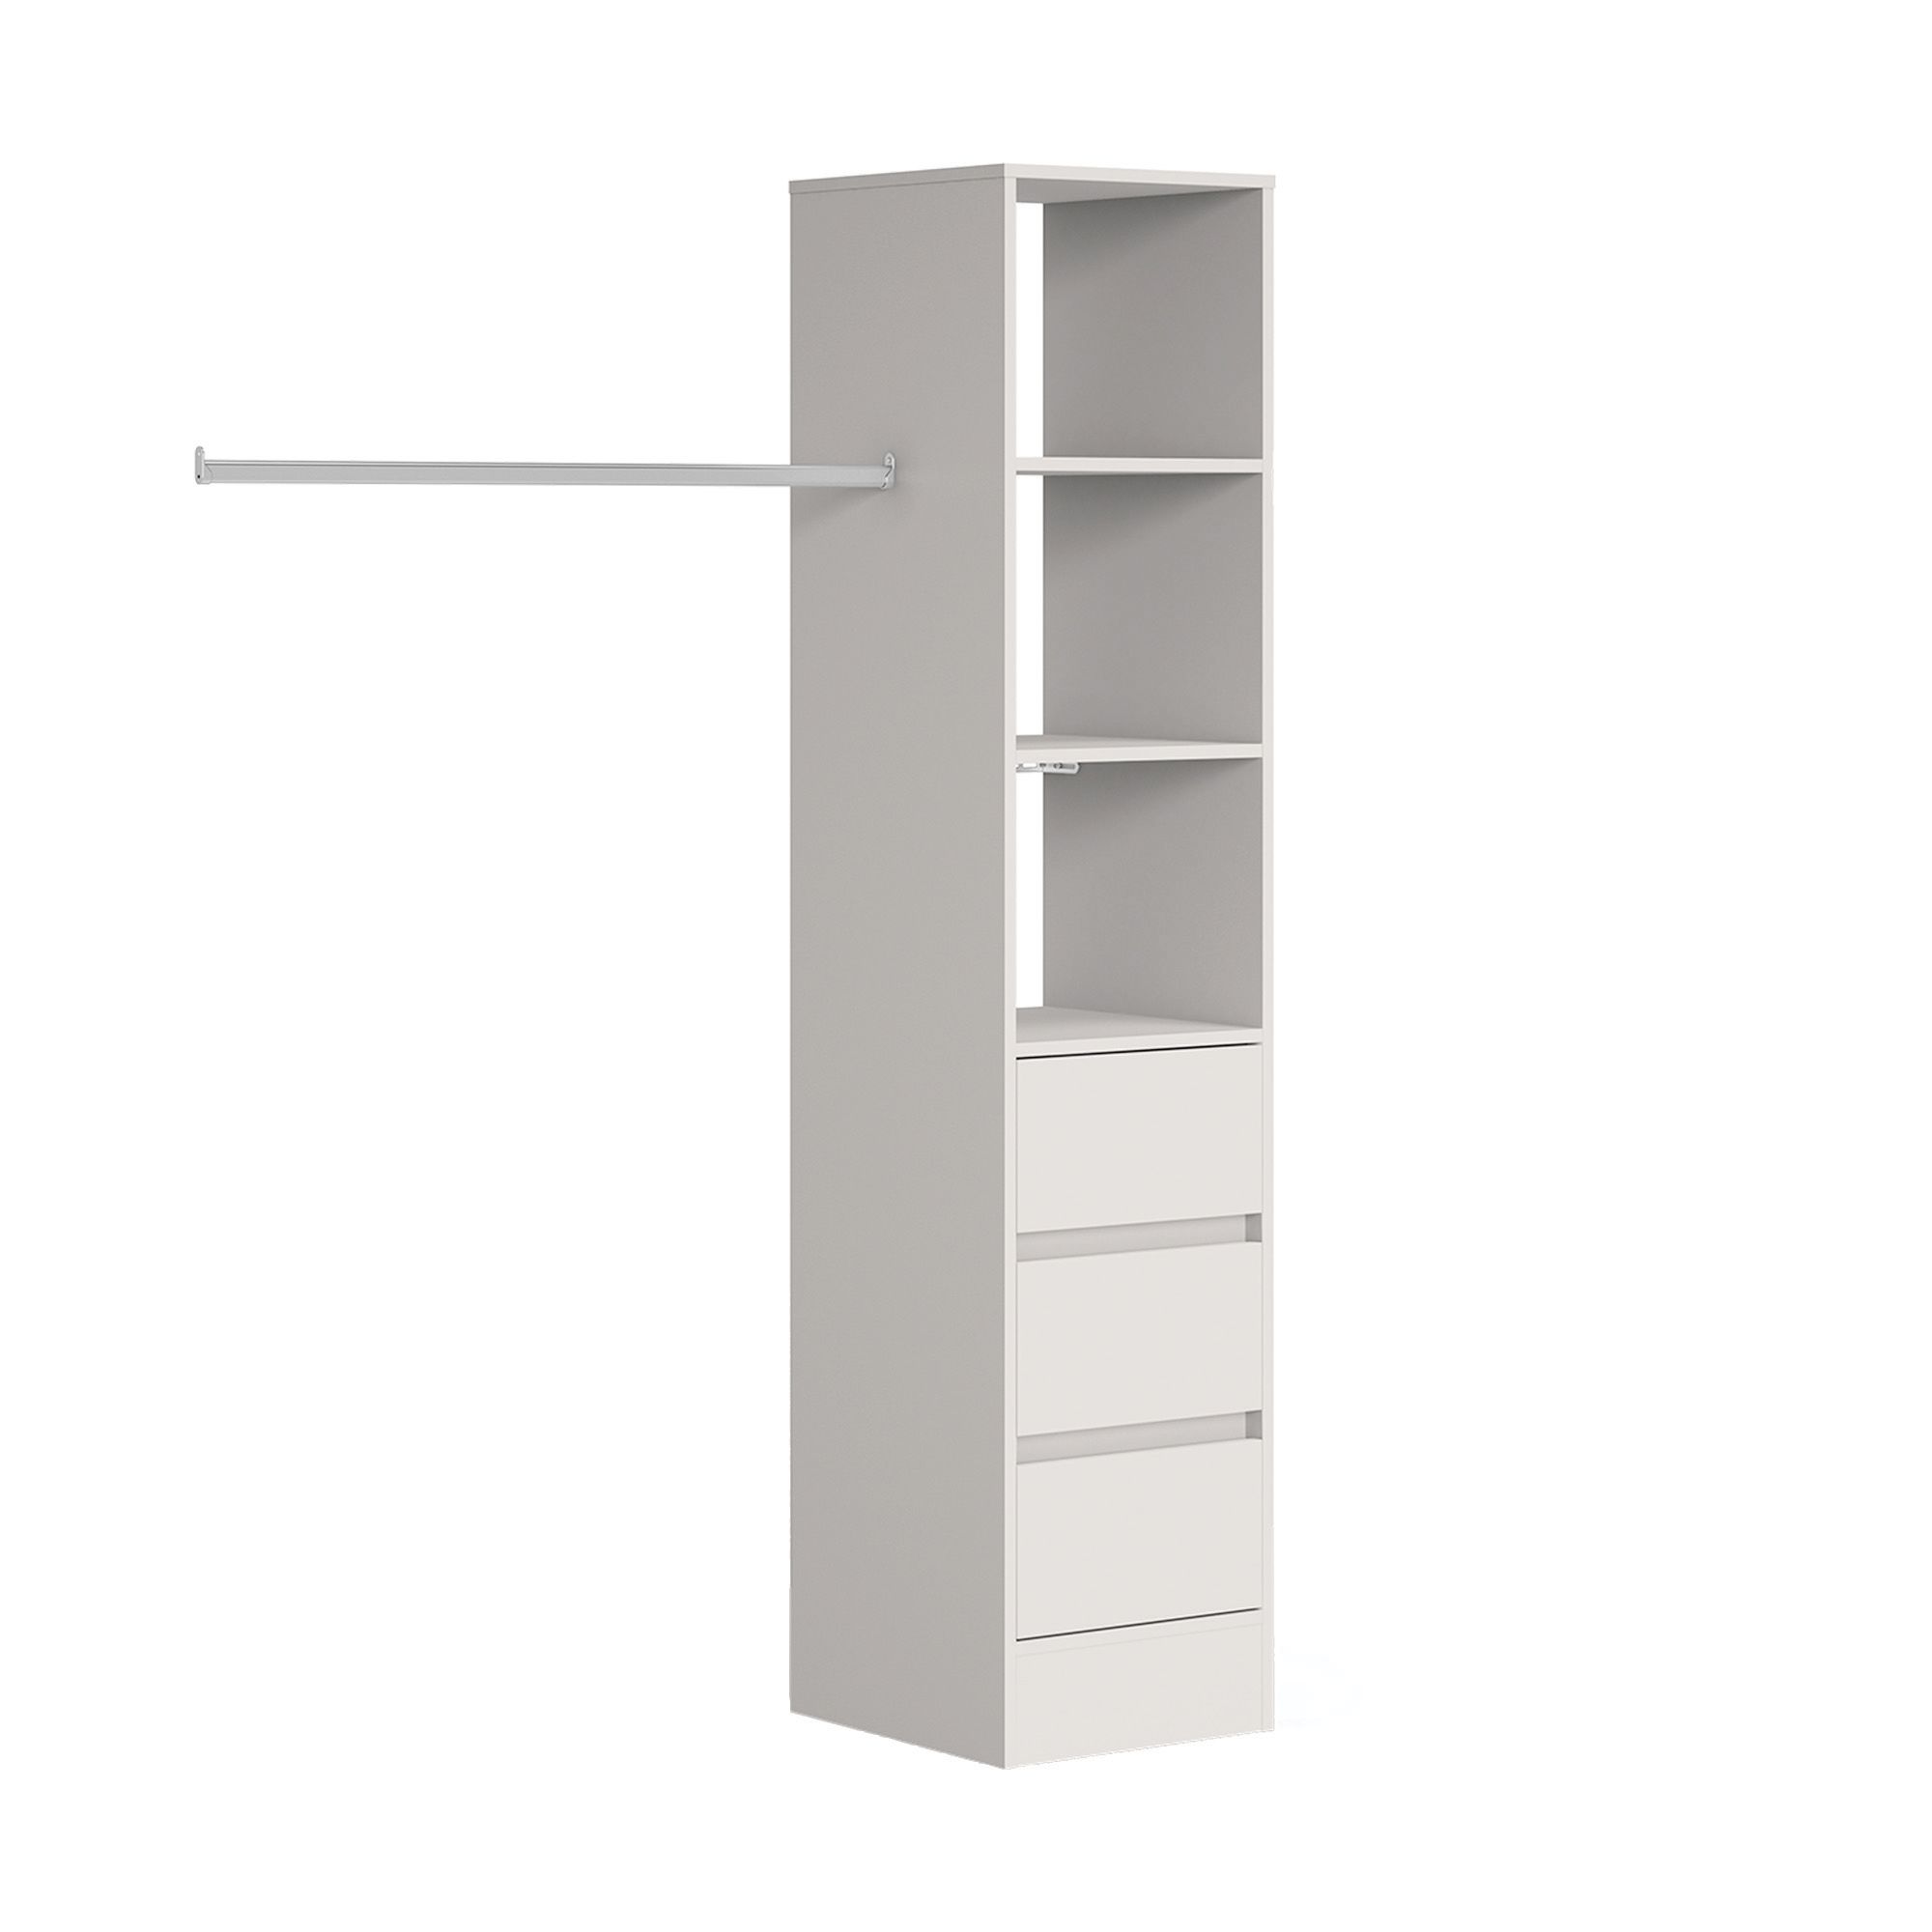 Image of Spacepro Wardrobe Storage Kit Tower Unit with 3 Drawers Cashmere - 450mm